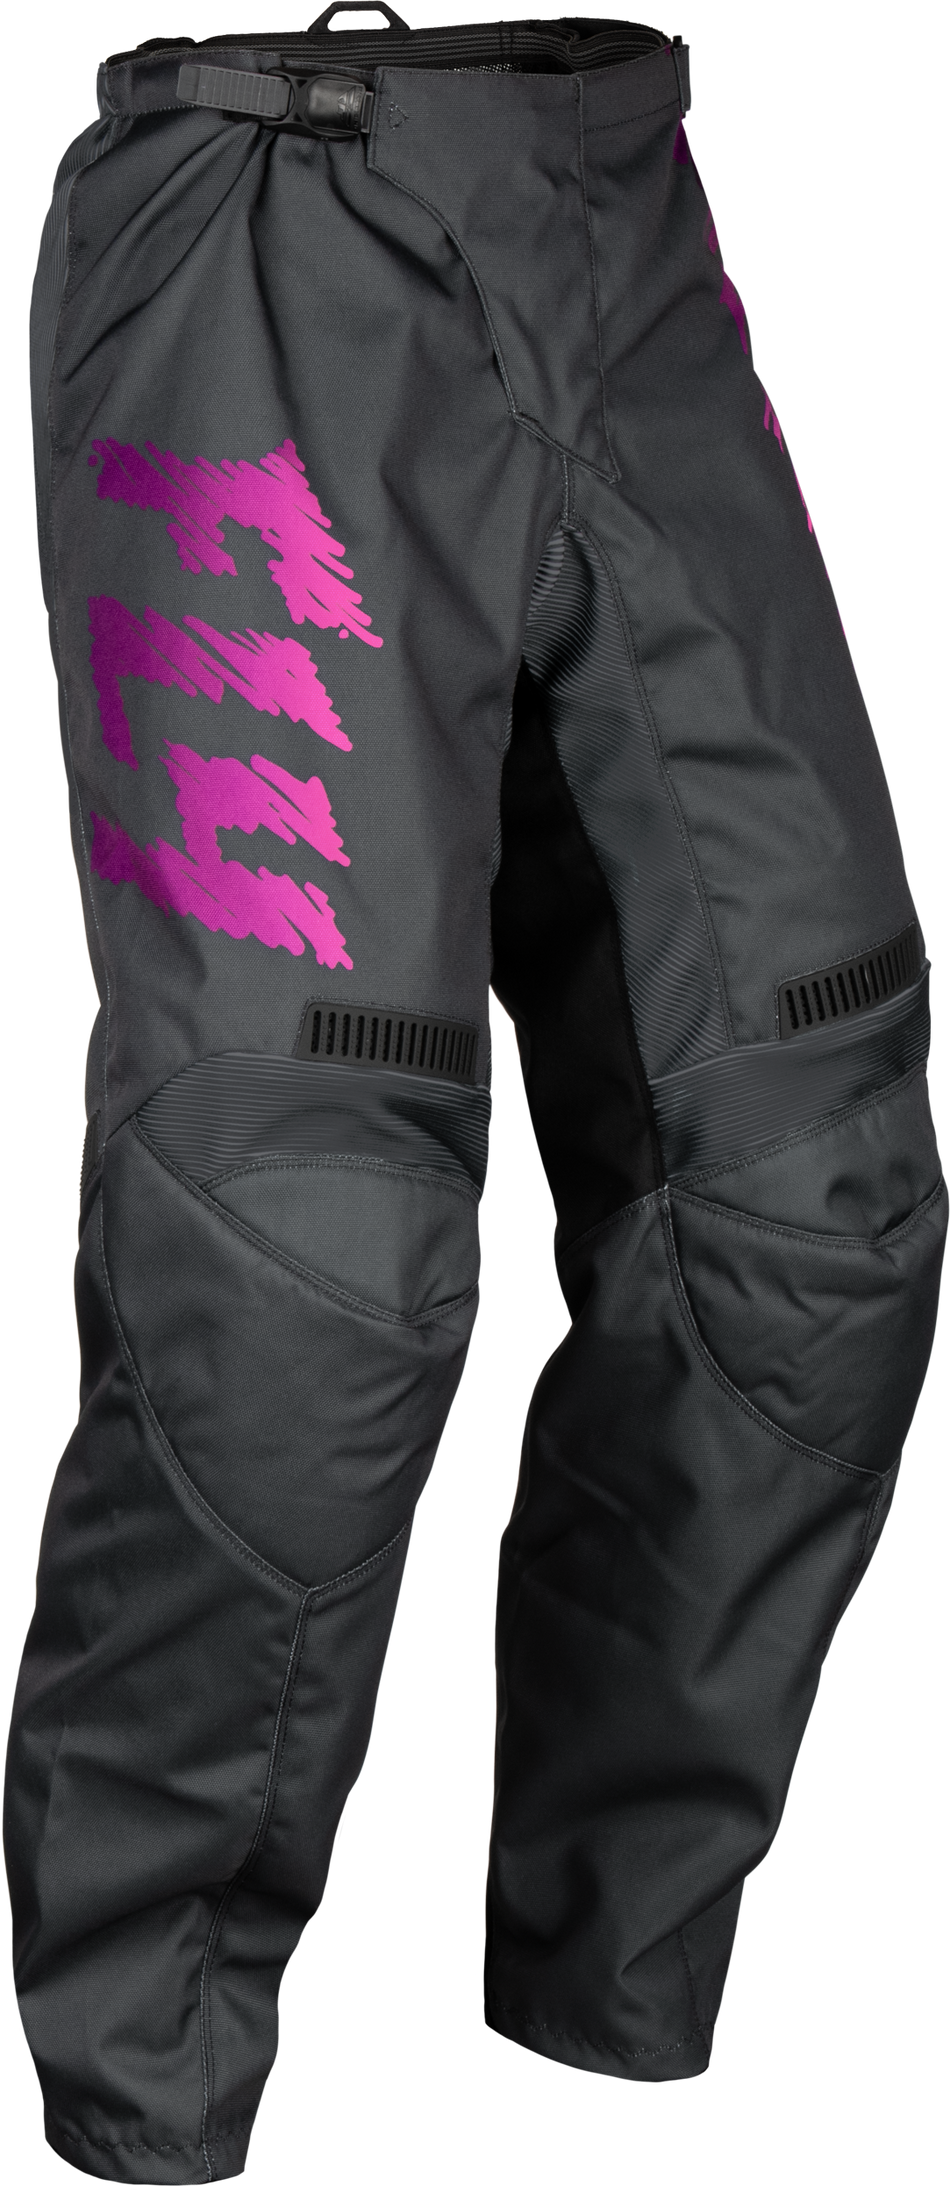 FLY RACING Youth F-16 Pants Grey/Charcoal/Pink Sz 22 377-23022